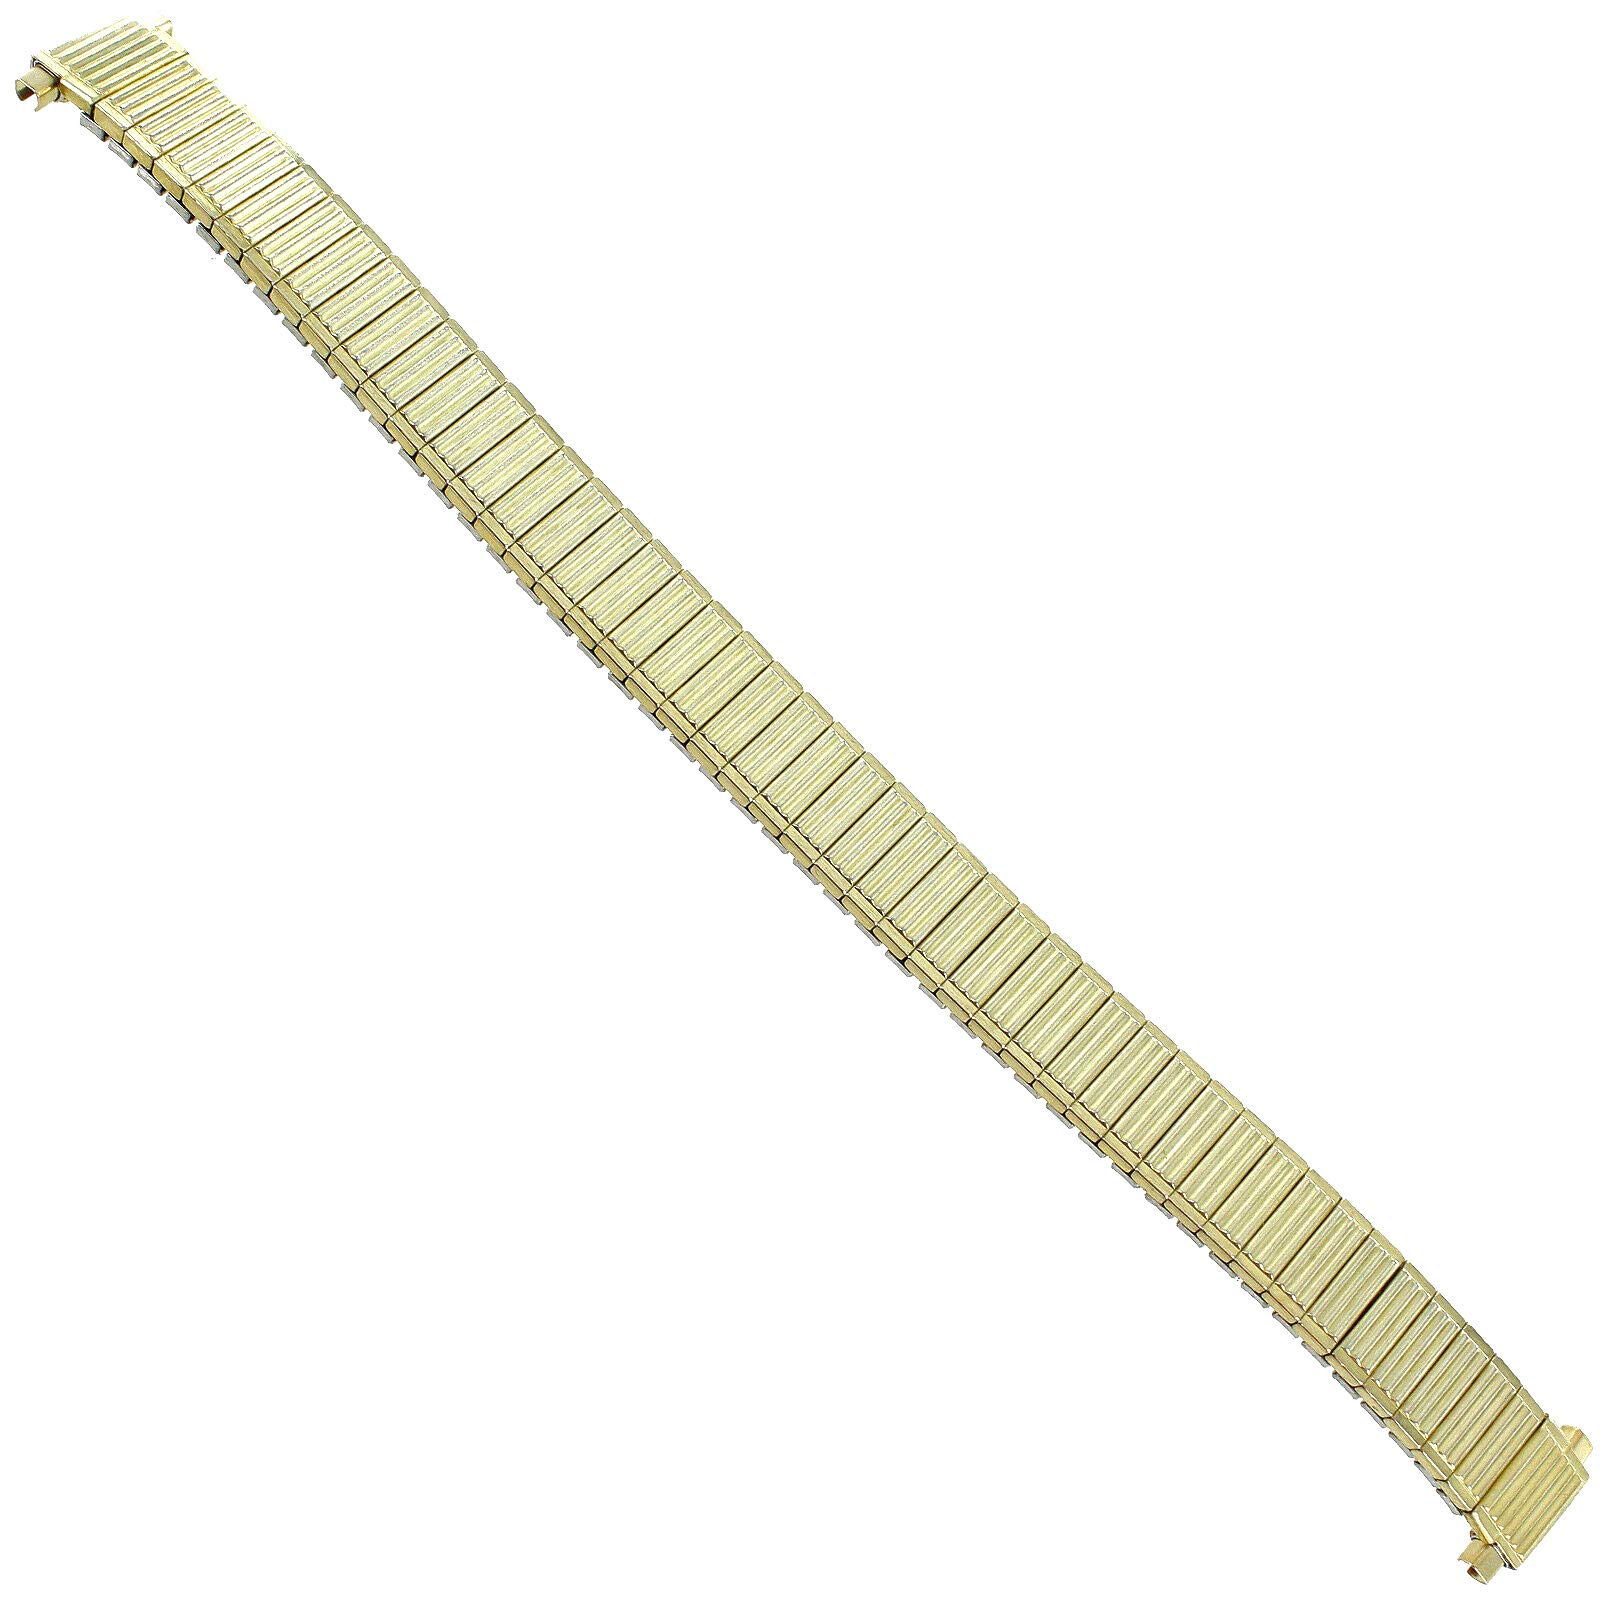 9-12mm Speidel Gold Tone Expansion Stainless Steel Watch Band Long 2203/33